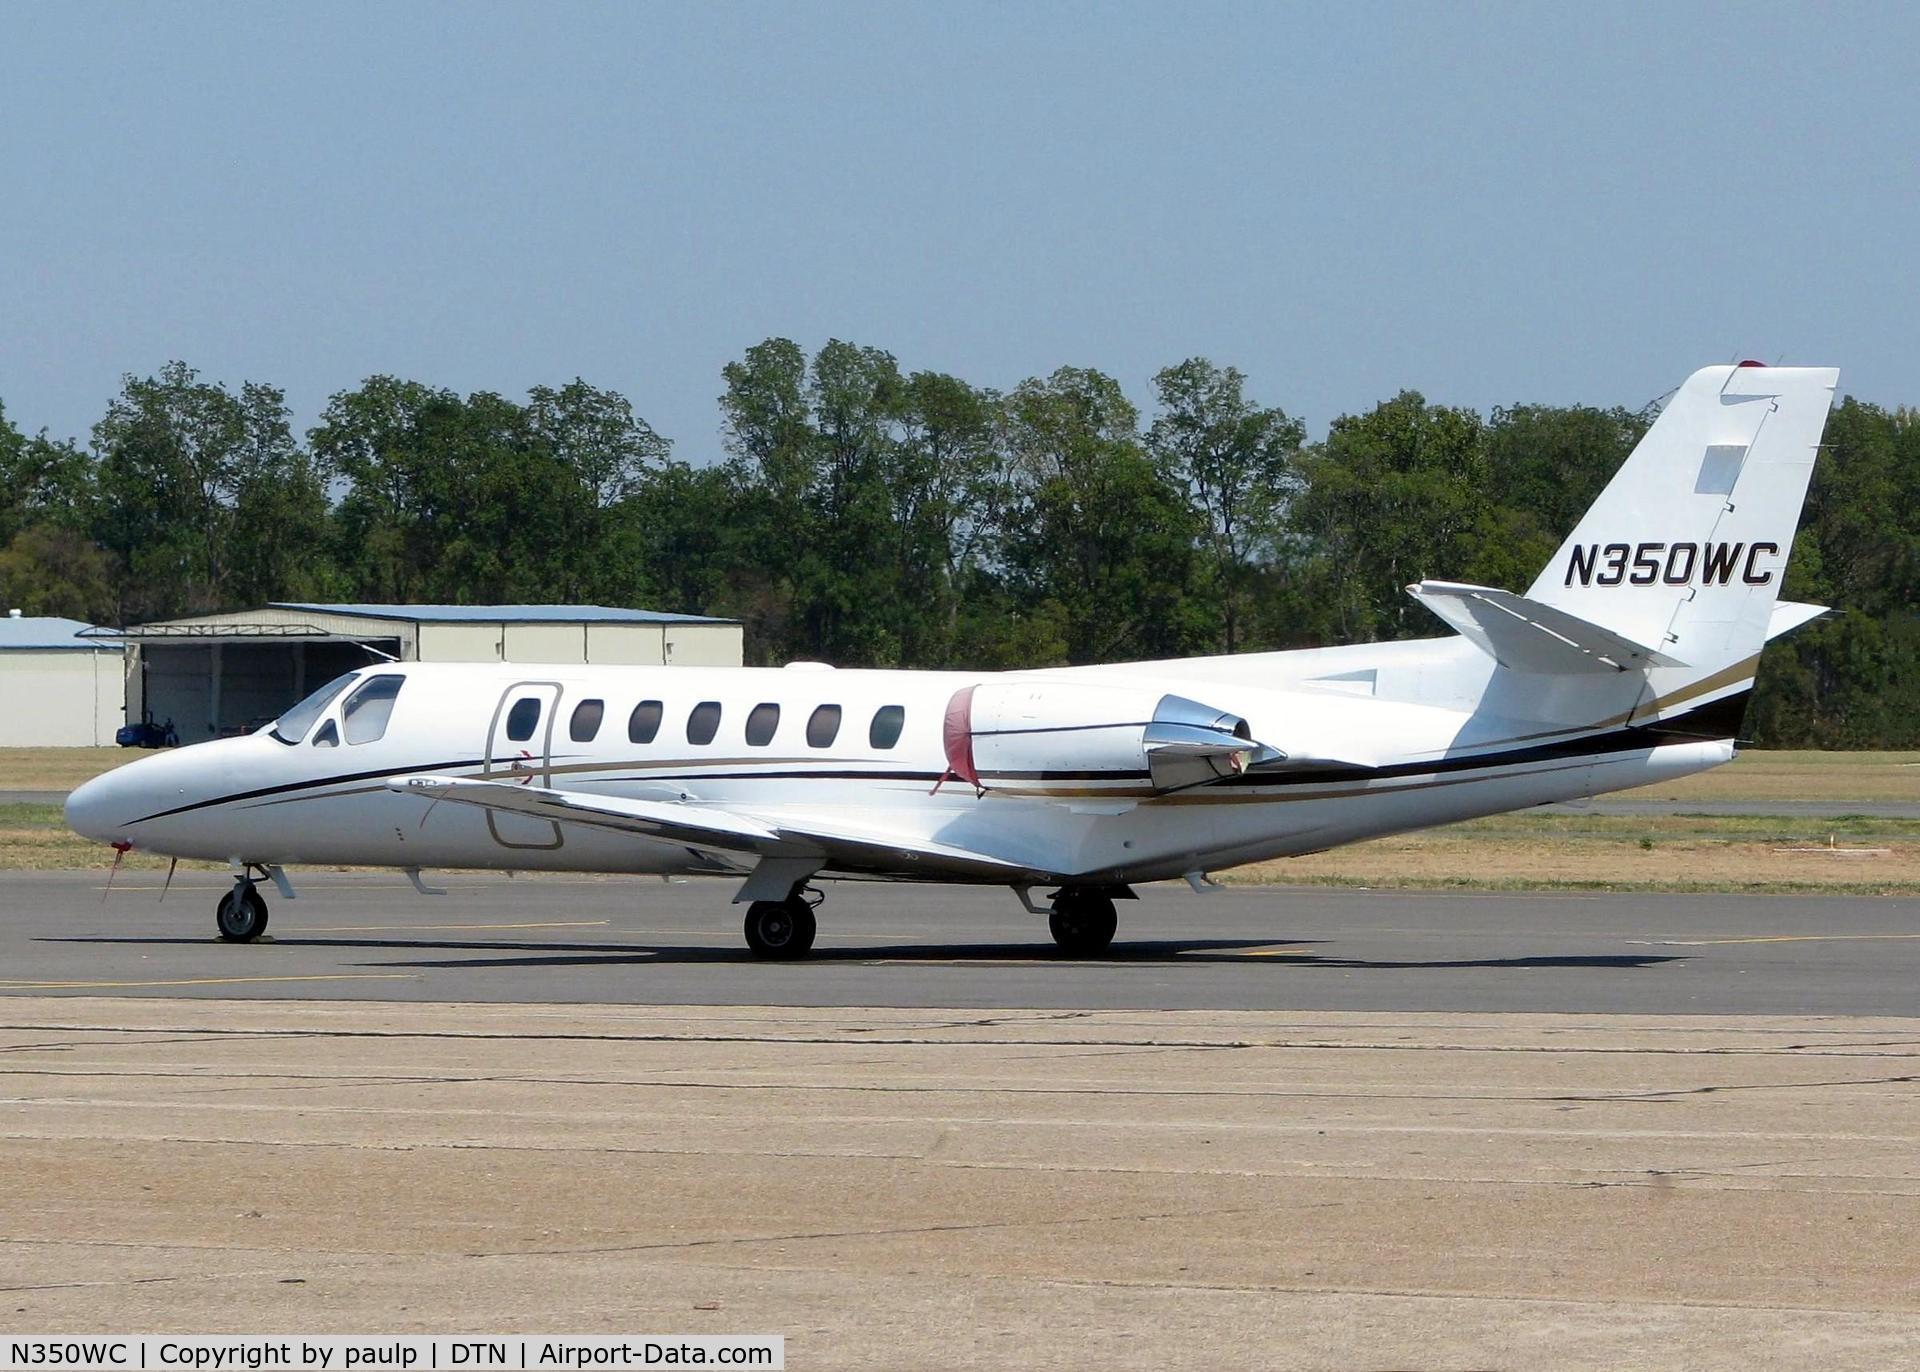 N350WC, 1994 Cessna 560 C/N 560-0266, At Downtown Shreveport.